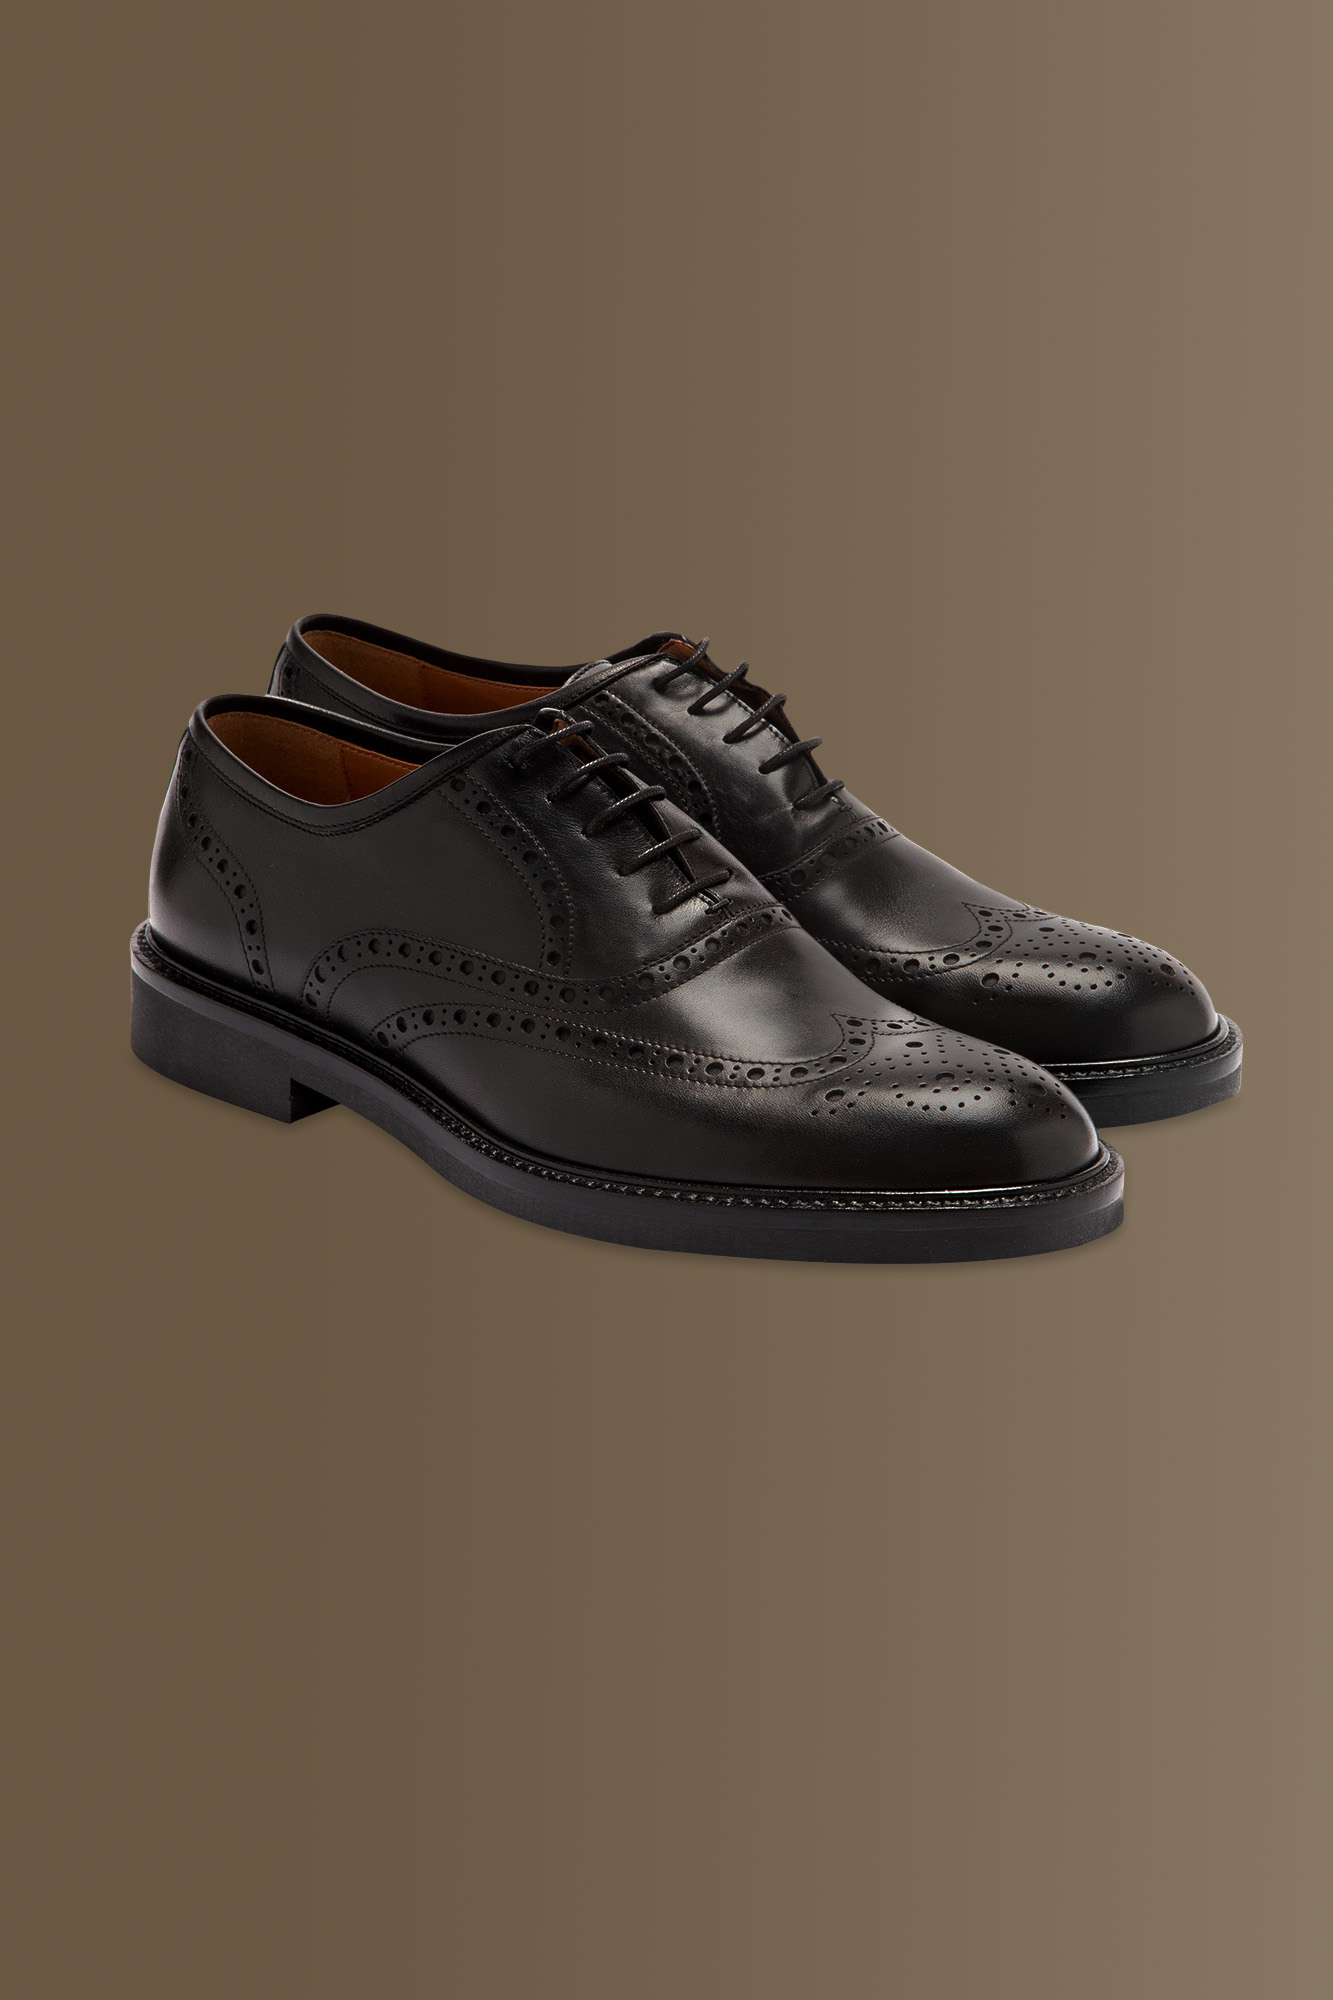 Scarpa uomo oxford Brouge 100% pelle image number null